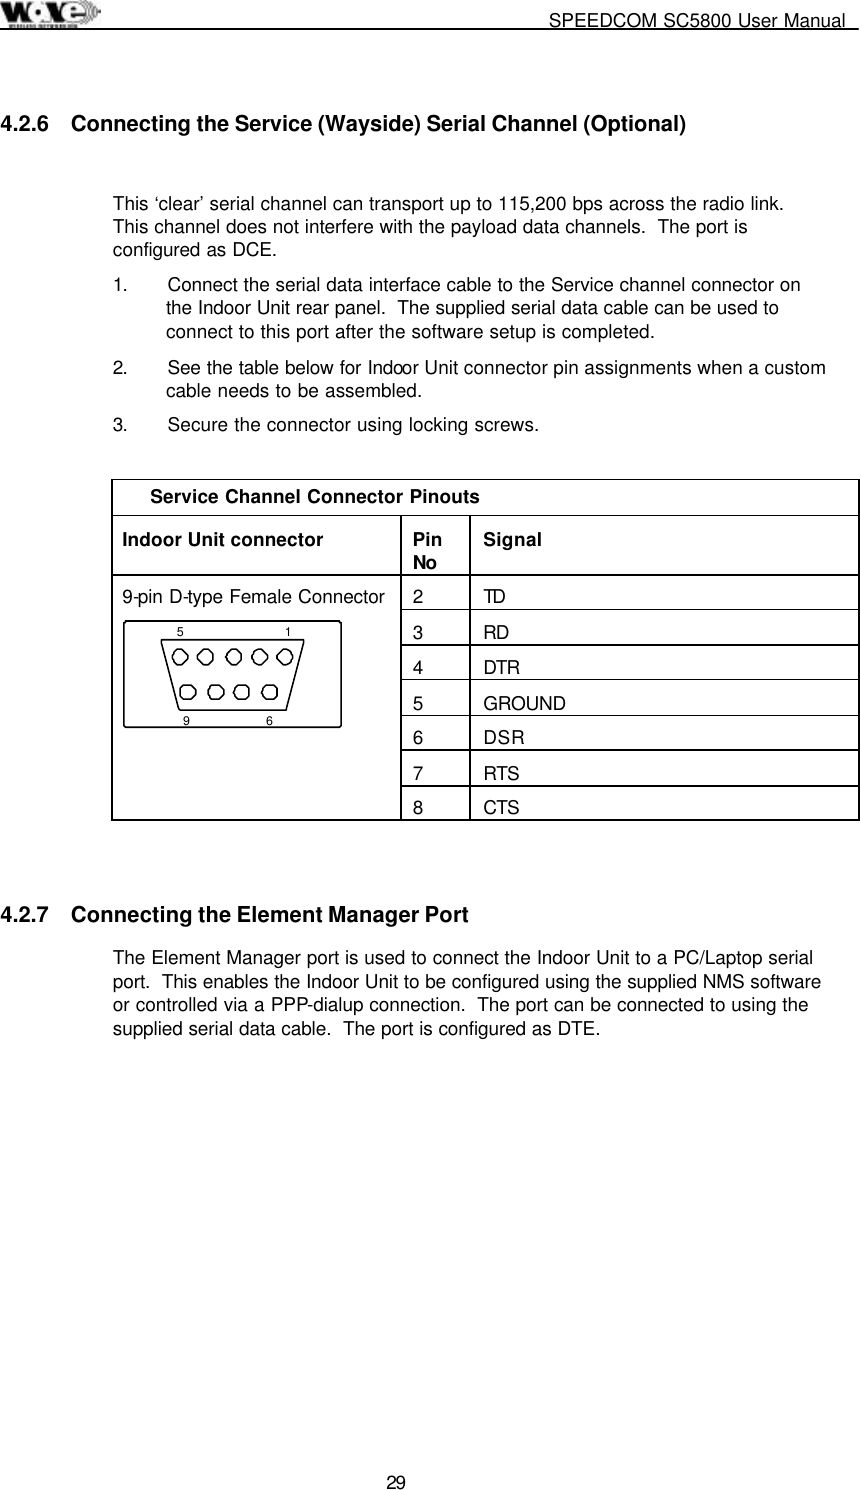     SPEEDCOM SC5800 User Manual  29 4.2.6  Connecting the Service (Wayside) Serial Channel (Optional)  This ‘clear’ serial channel can transport up to 115,200 bps across the radio link.  This channel does not interfere with the payload data channels.  The port is configured as DCE. 1.  Connect the serial data interface cable to the Service channel connector on the Indoor Unit rear panel.  The supplied serial data cable can be used to connect to this port after the software setup is completed. 2.  See the table below for Indoor Unit connector pin assignments when a custom cable needs to be assembled. 3.  Secure the connector using locking screws.  Service Channel Connector Pinouts Indoor Unit connector  Pin No  Signal 2 TD 3 RD 4 DTR 5 GROUND 6 DSR 7 RTS 9-pin D-type Female Connector 1569 8 CTS  4.2.7  Connecting the Element Manager Port The Element Manager port is used to connect the Indoor Unit to a PC/Laptop serial port.  This enables the Indoor Unit to be configured using the supplied NMS software or controlled via a PPP-dialup connection.  The port can be connected to using the supplied serial data cable.  The port is configured as DTE. 